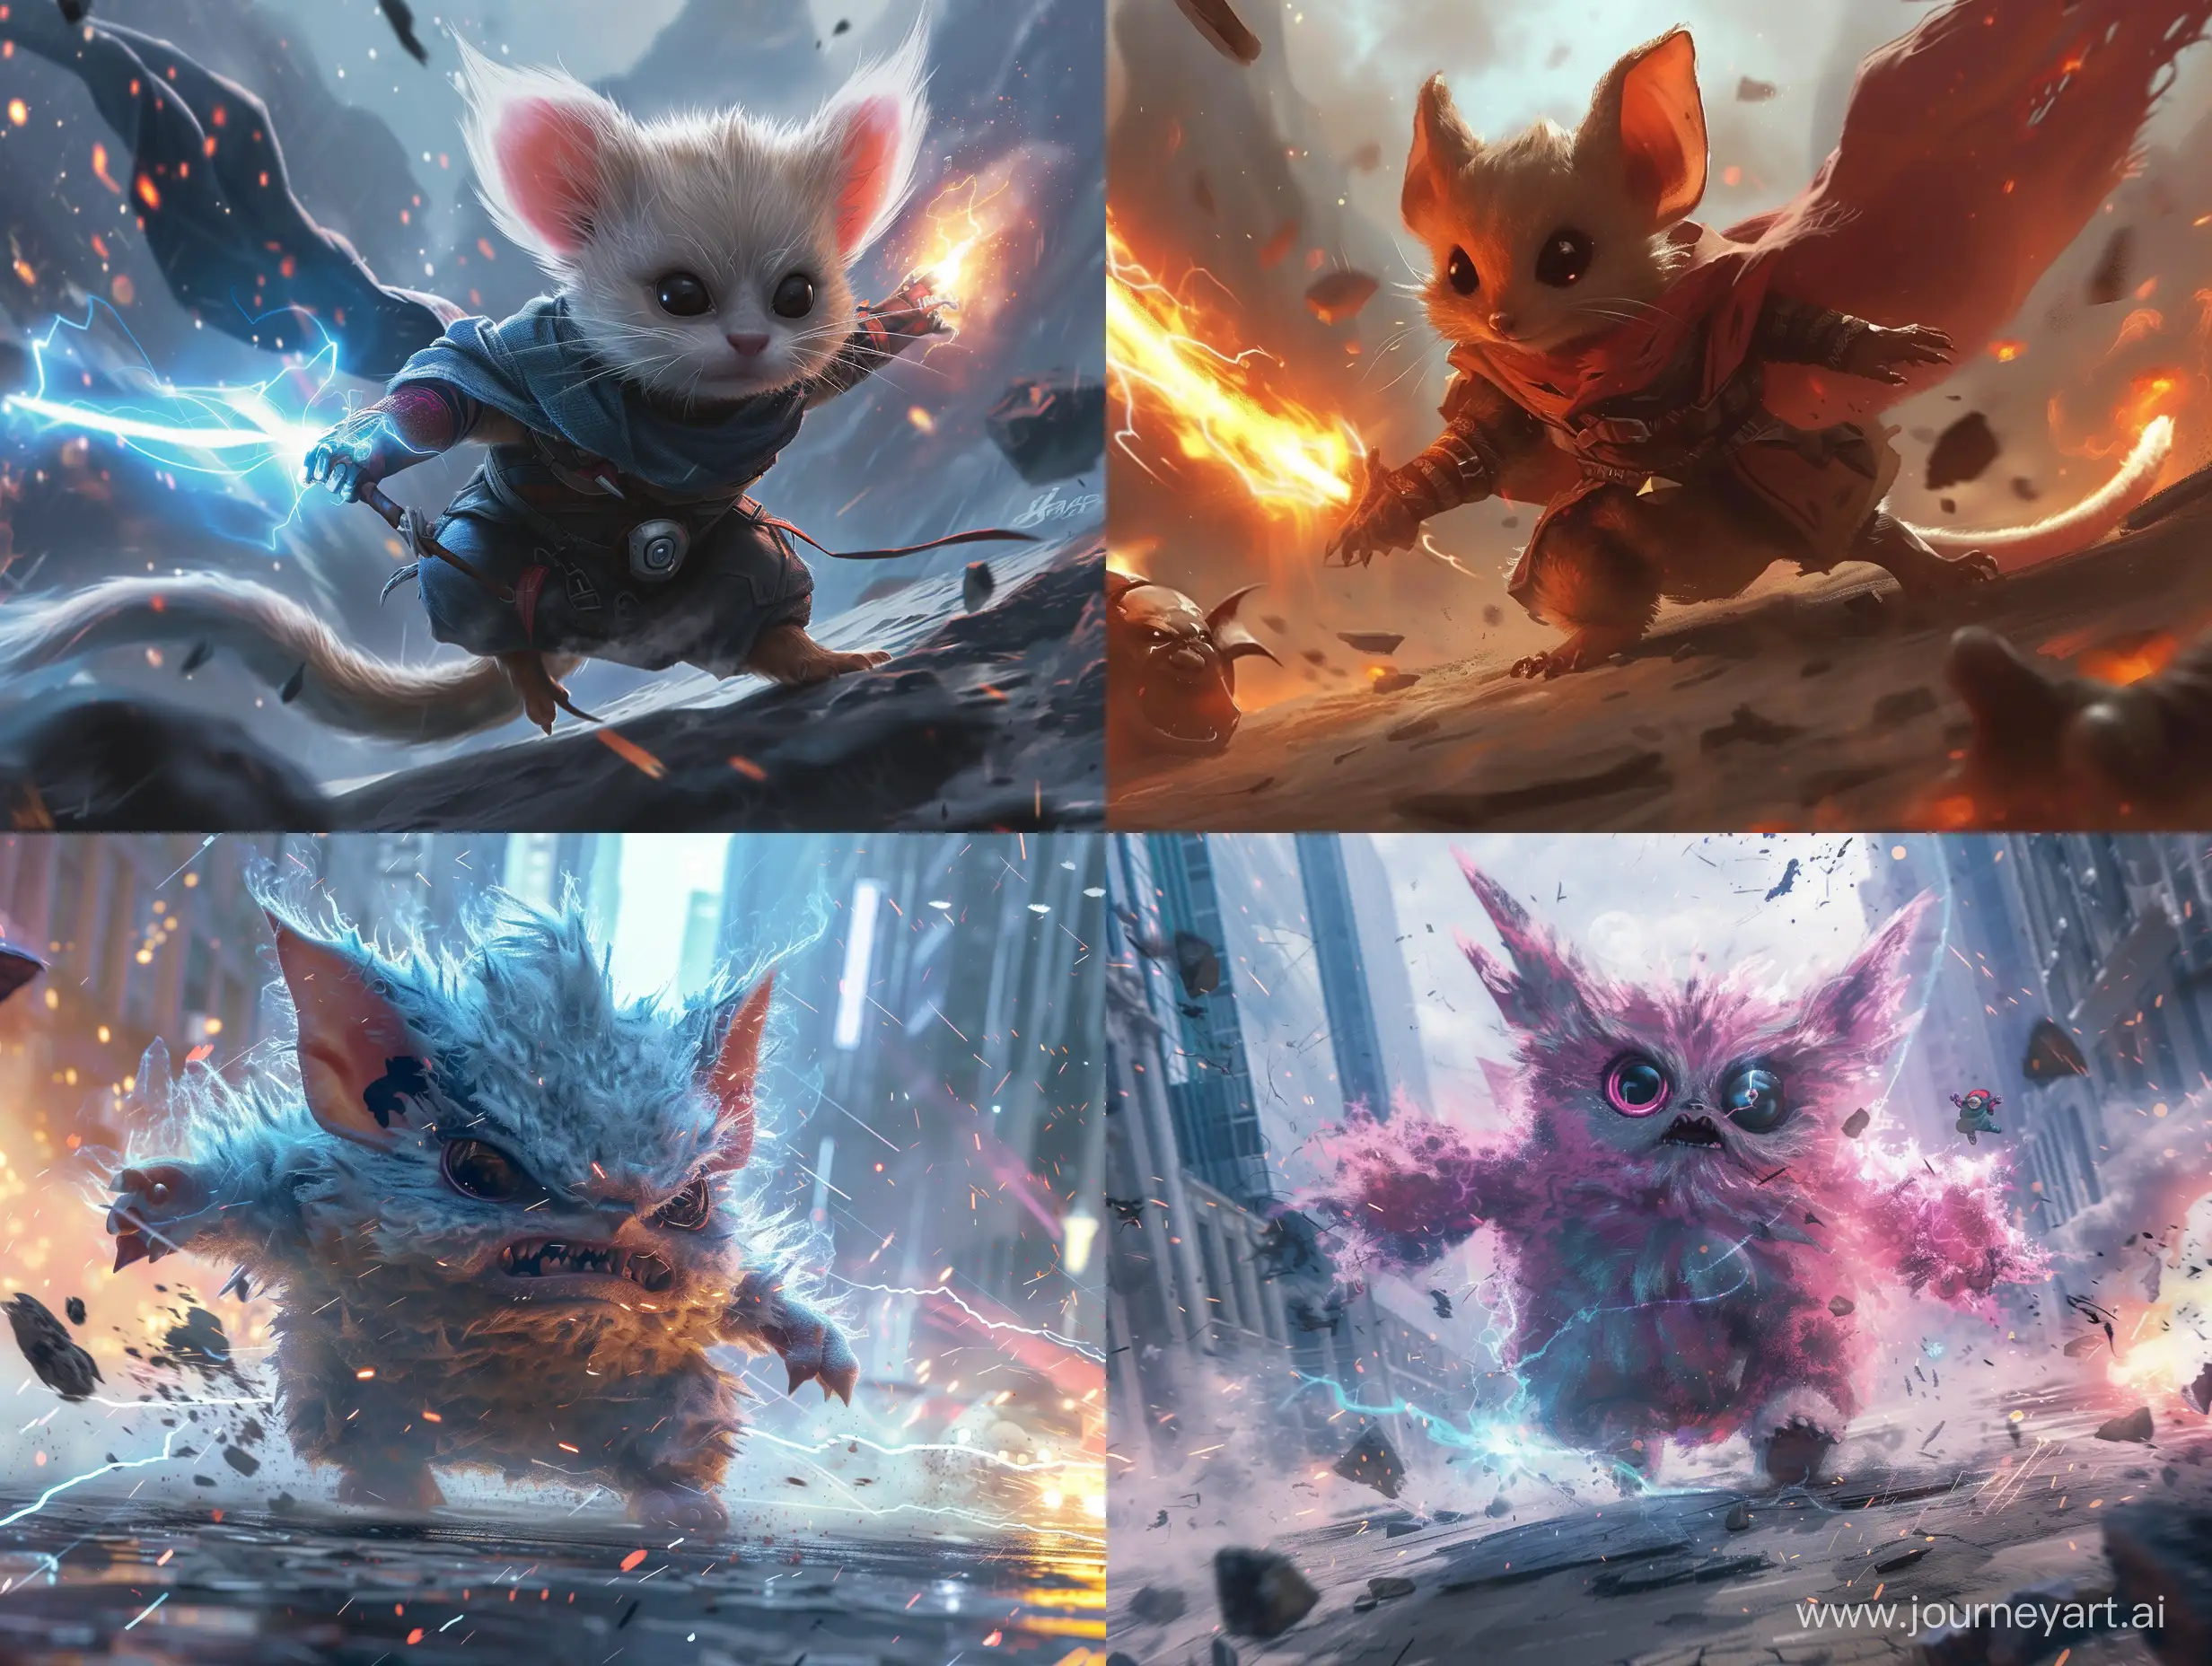 a cute creature with superpowers fighting badass villians, verydetailed, very realistic